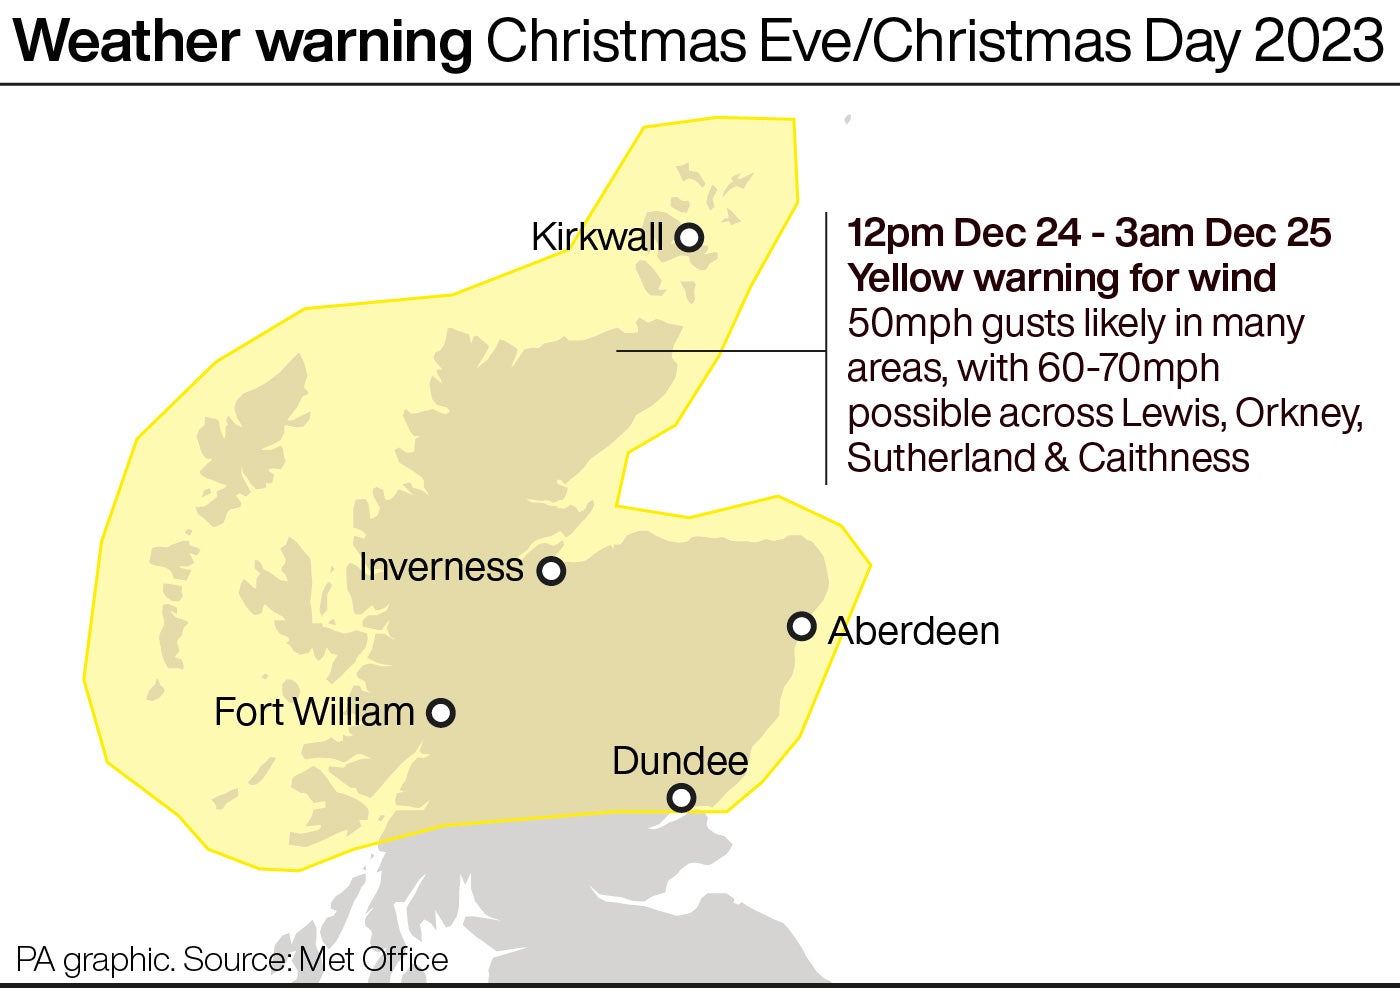 Wind warnings are in place for Christmas Eve